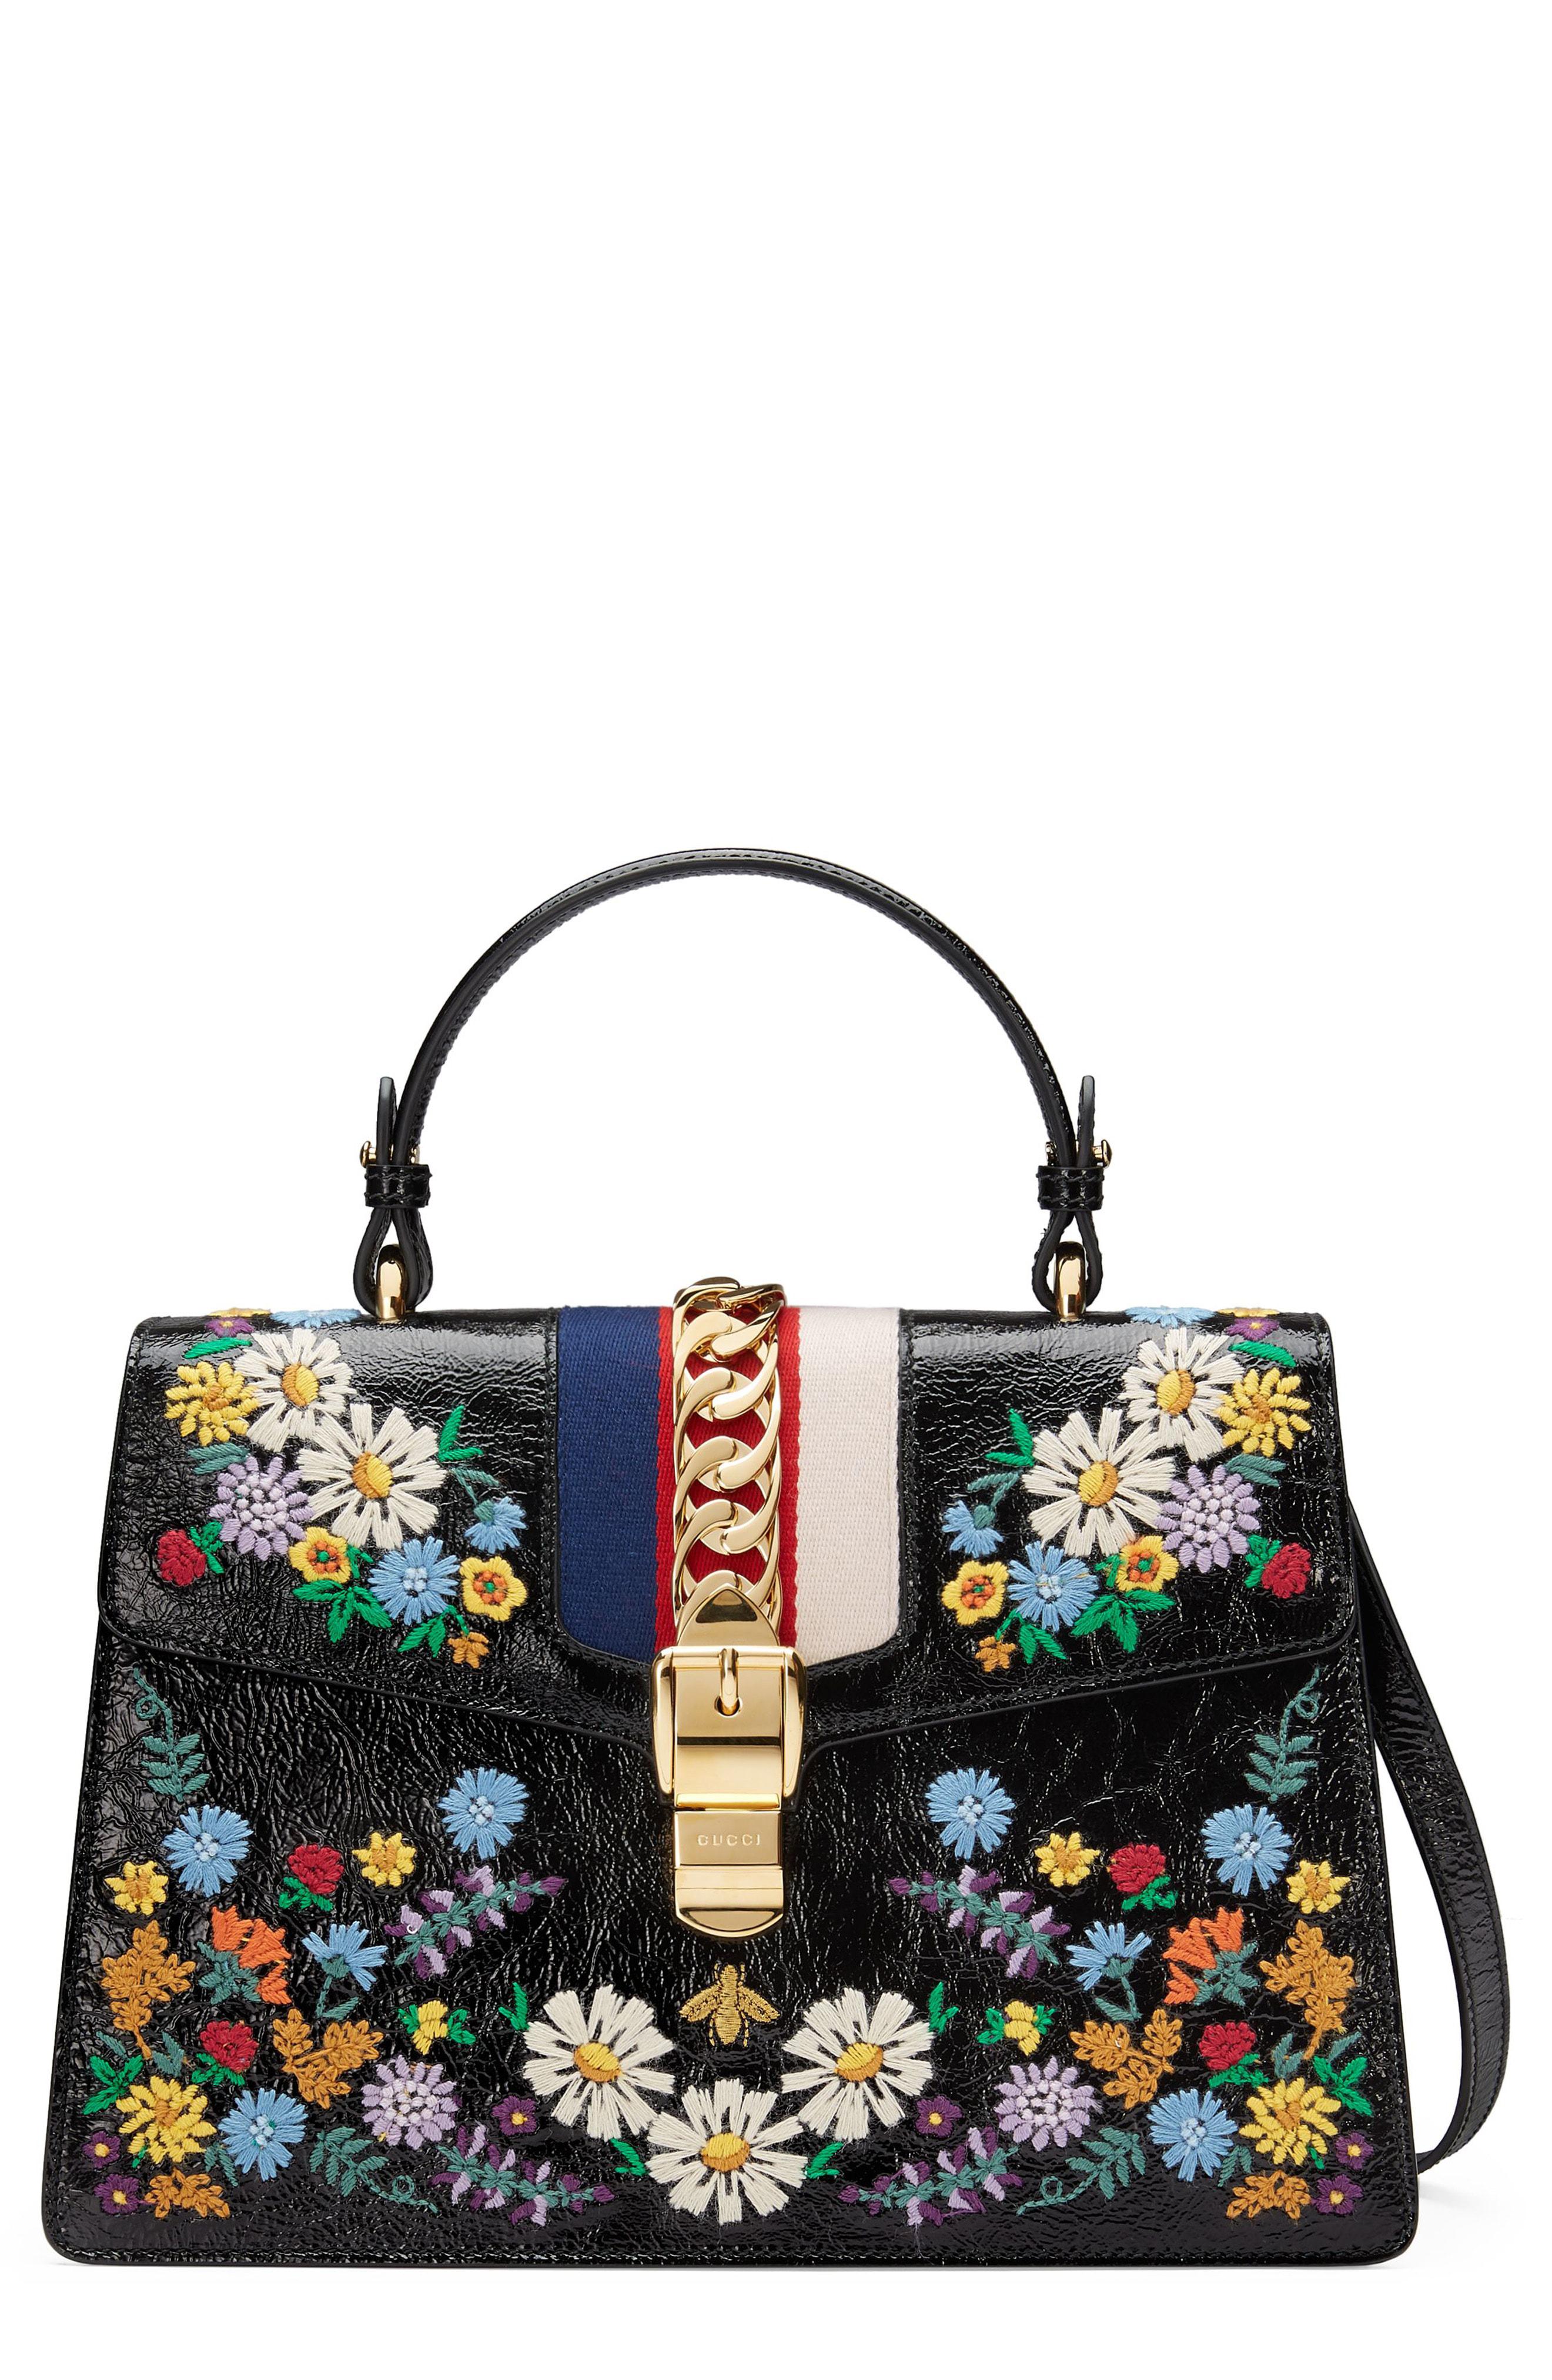 Lyst - Gucci Medium Sylvie Floral Embroidered Top Handle Leather ...